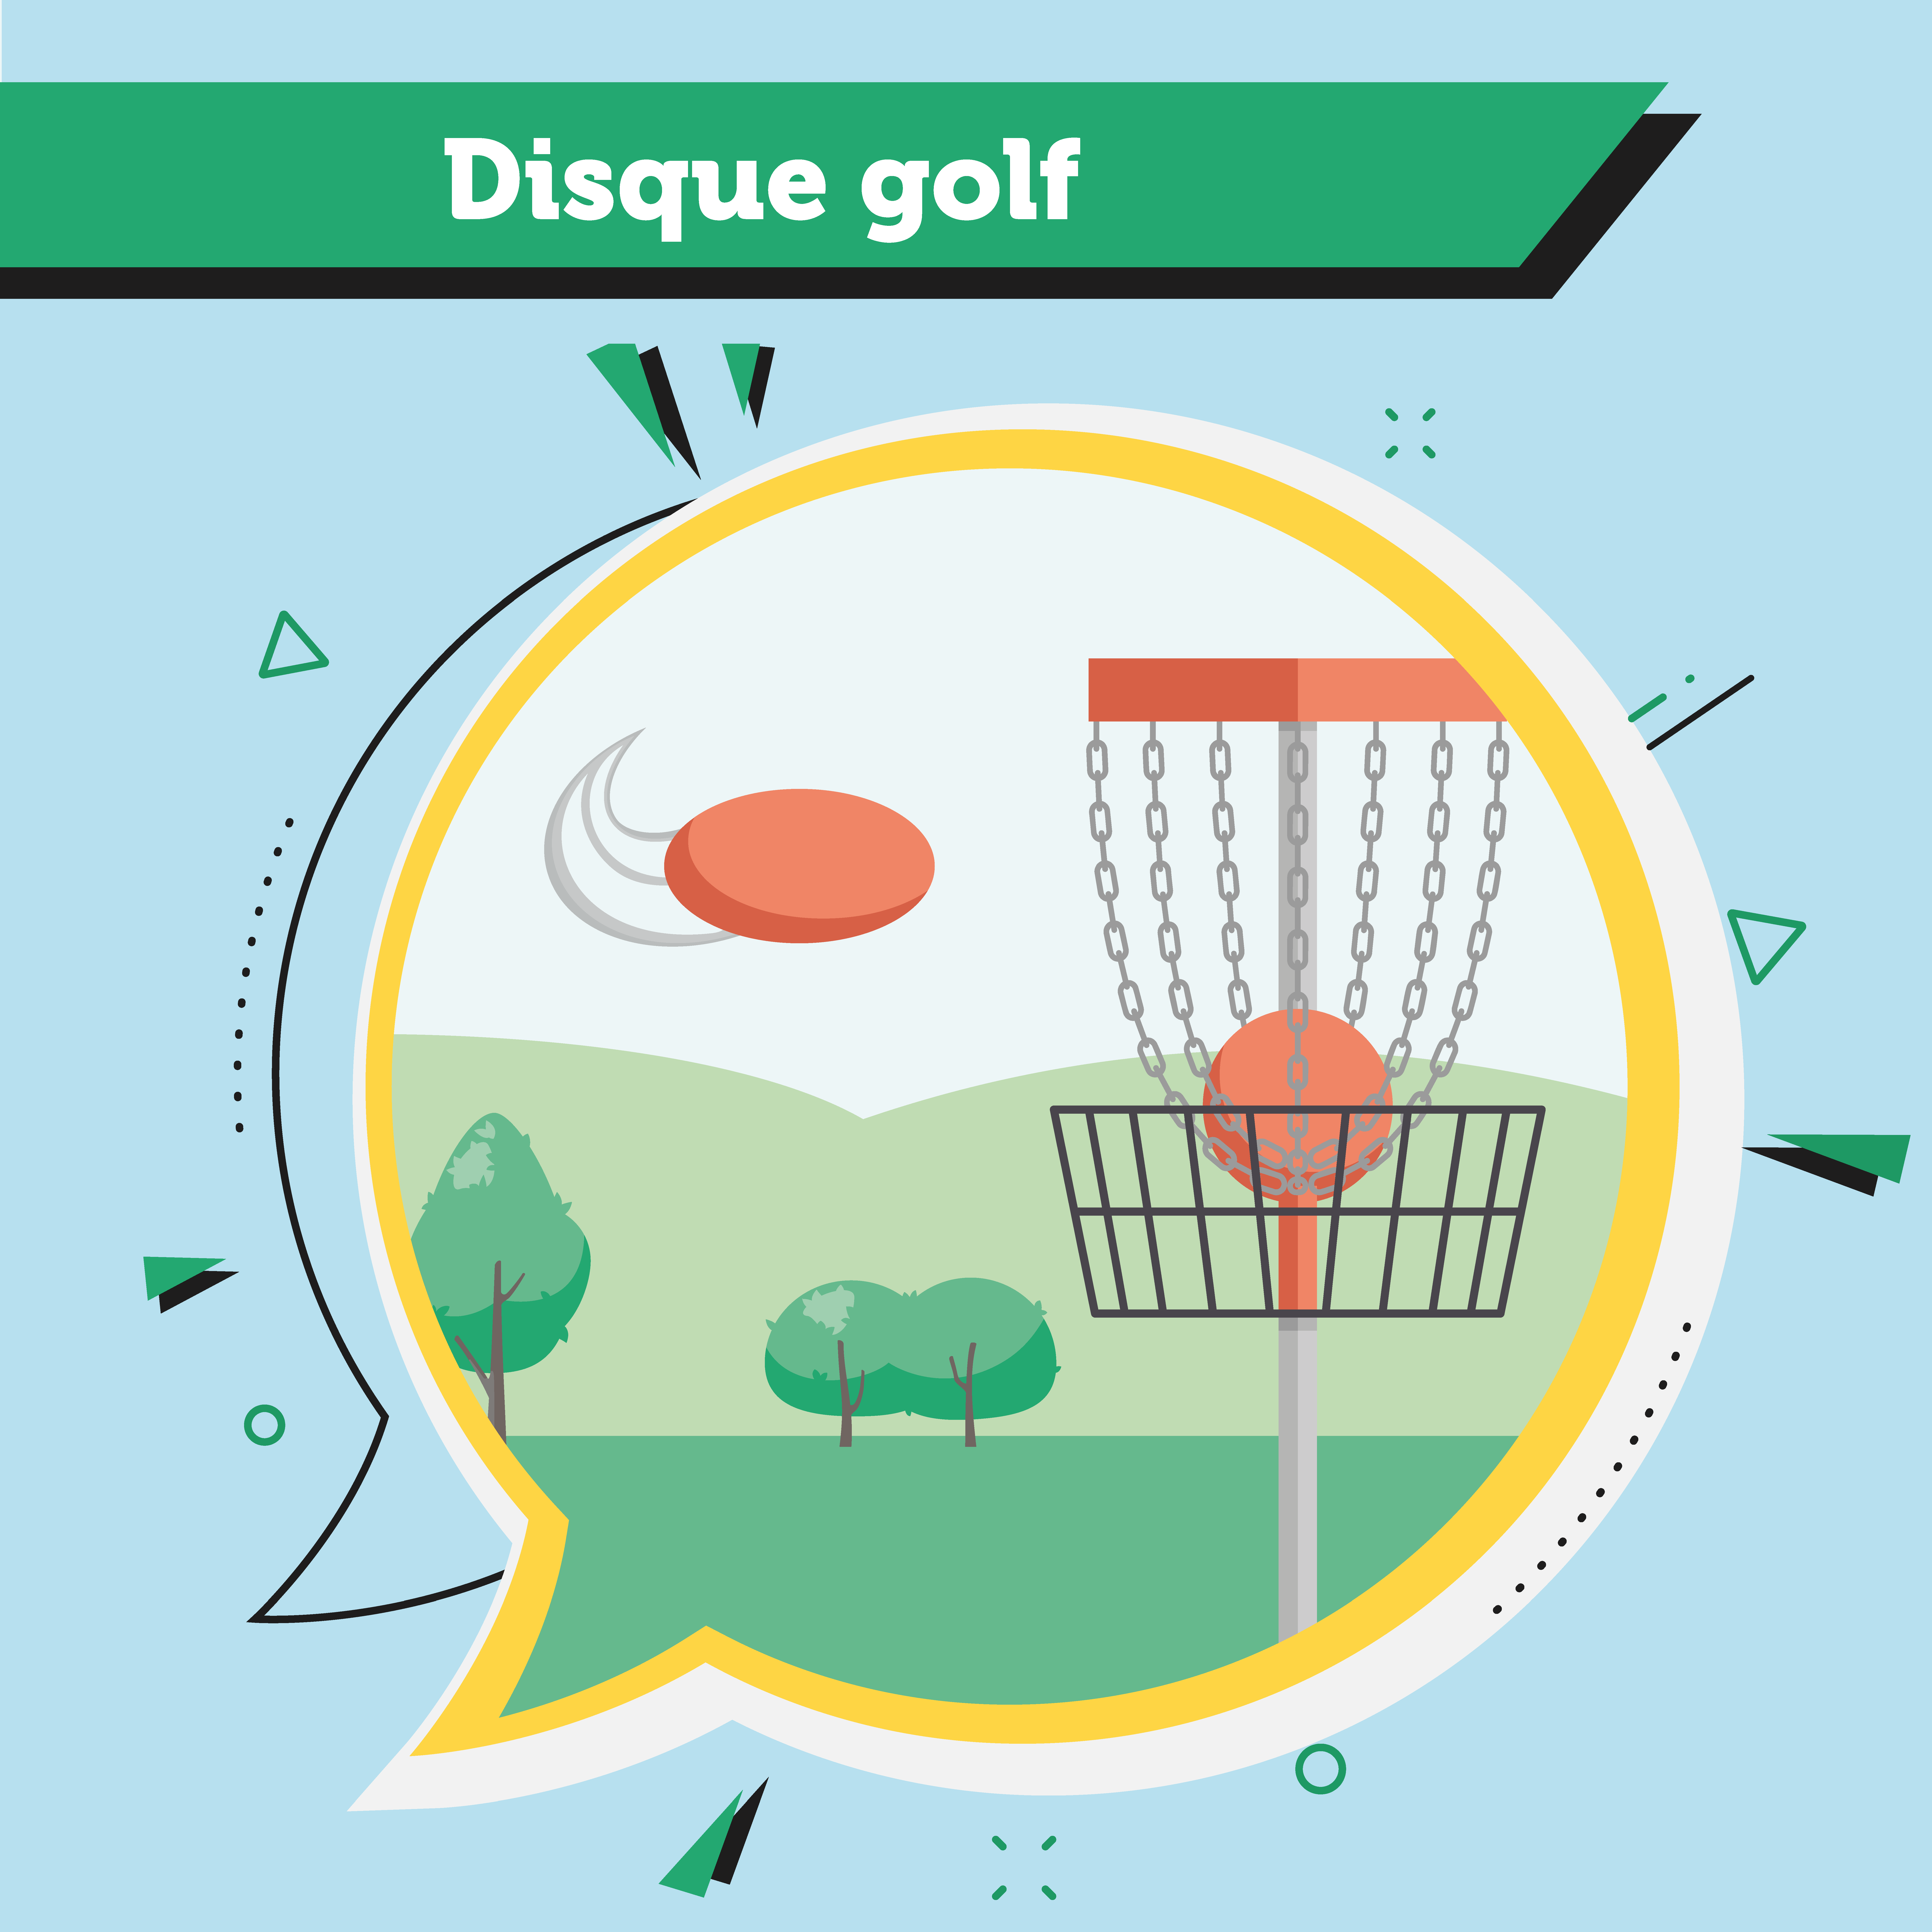 Disque-golf.png (532 KB)